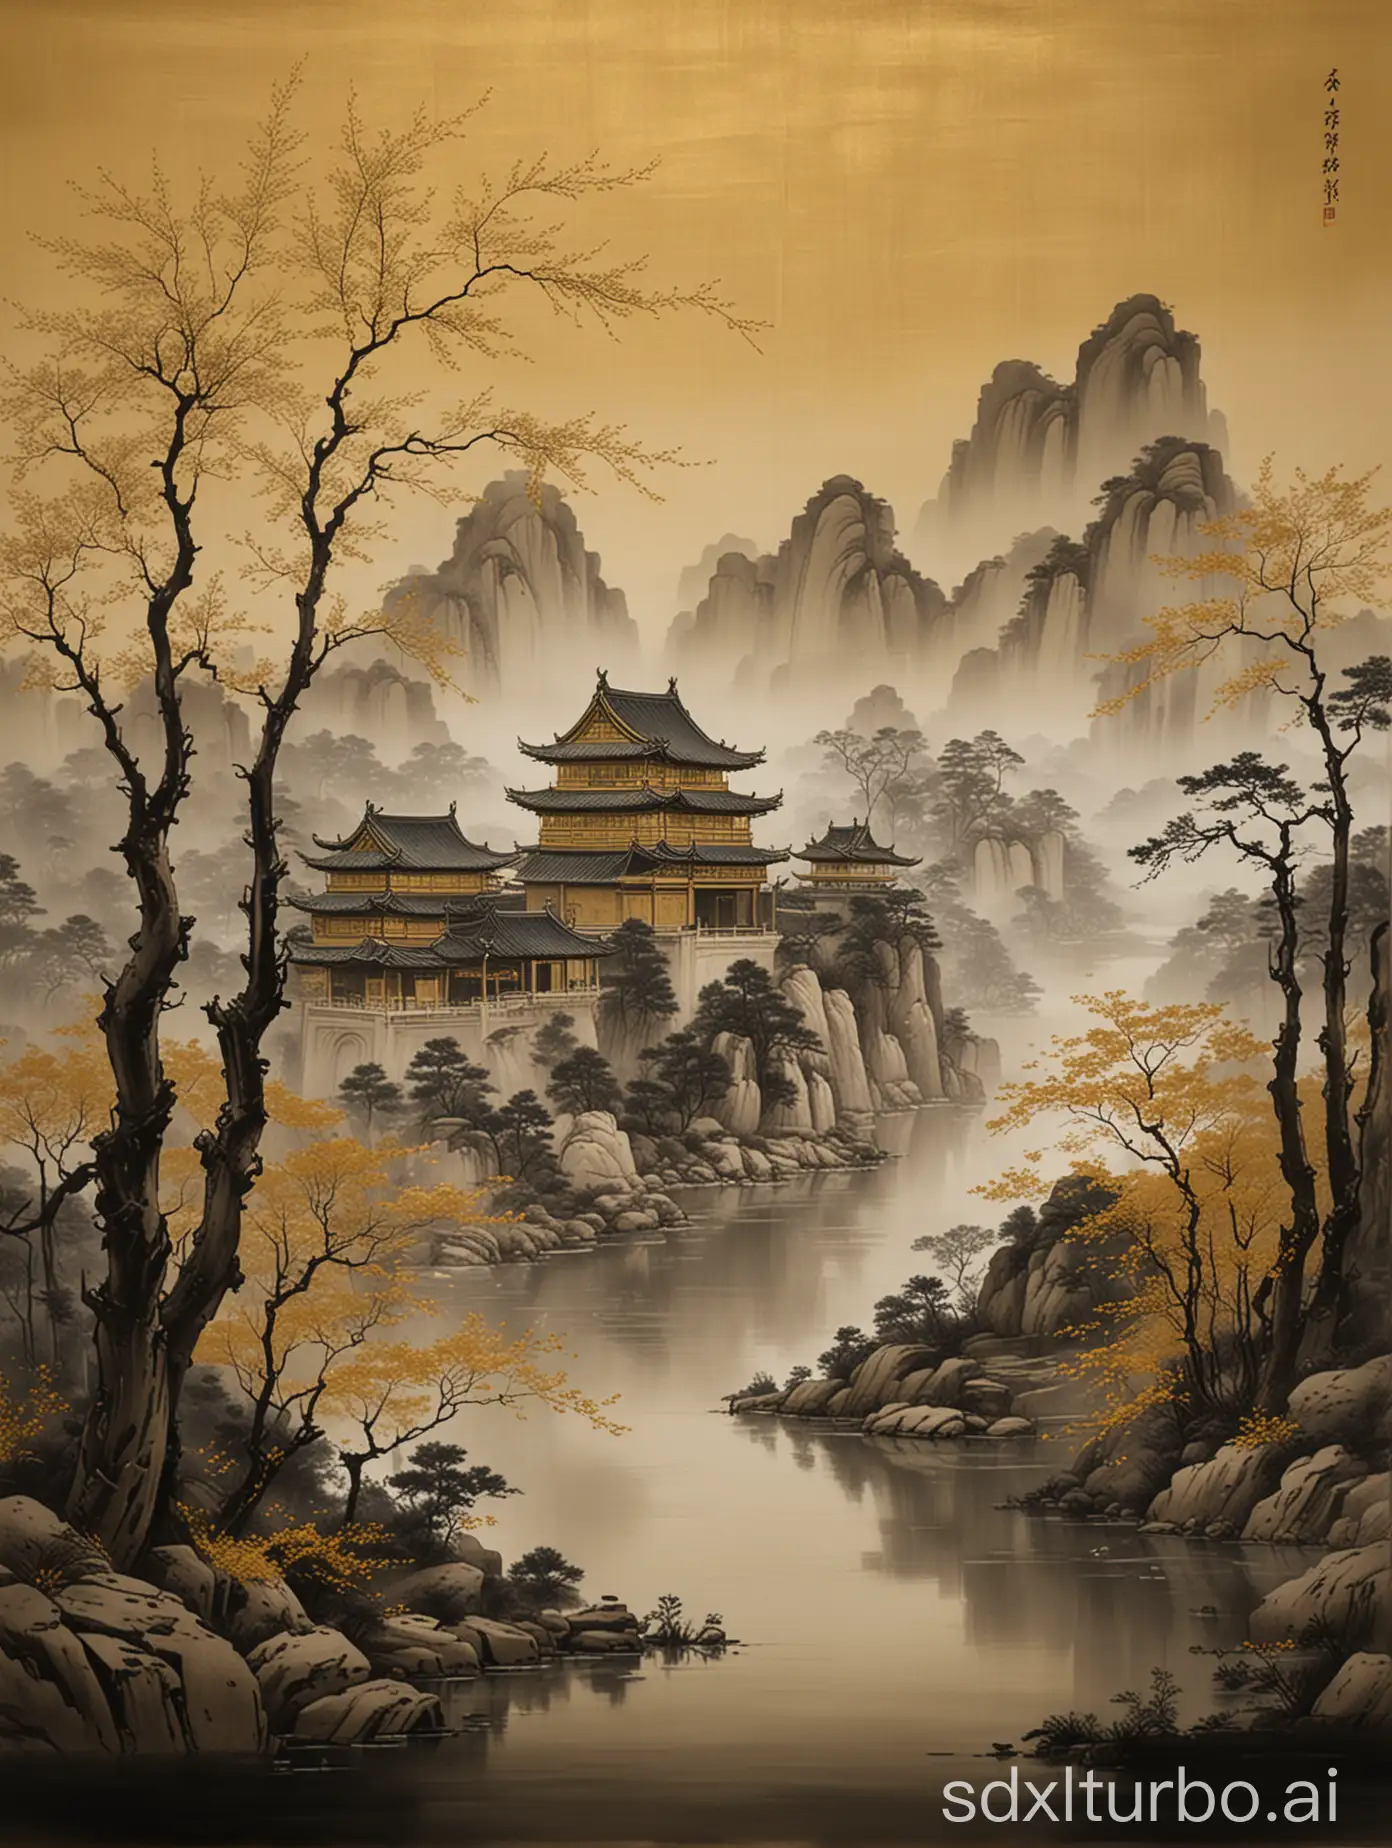 Ancient-Chinese-Architecture-Landscape-Painting-with-Golden-Buildings-on-Matte-Black-Background